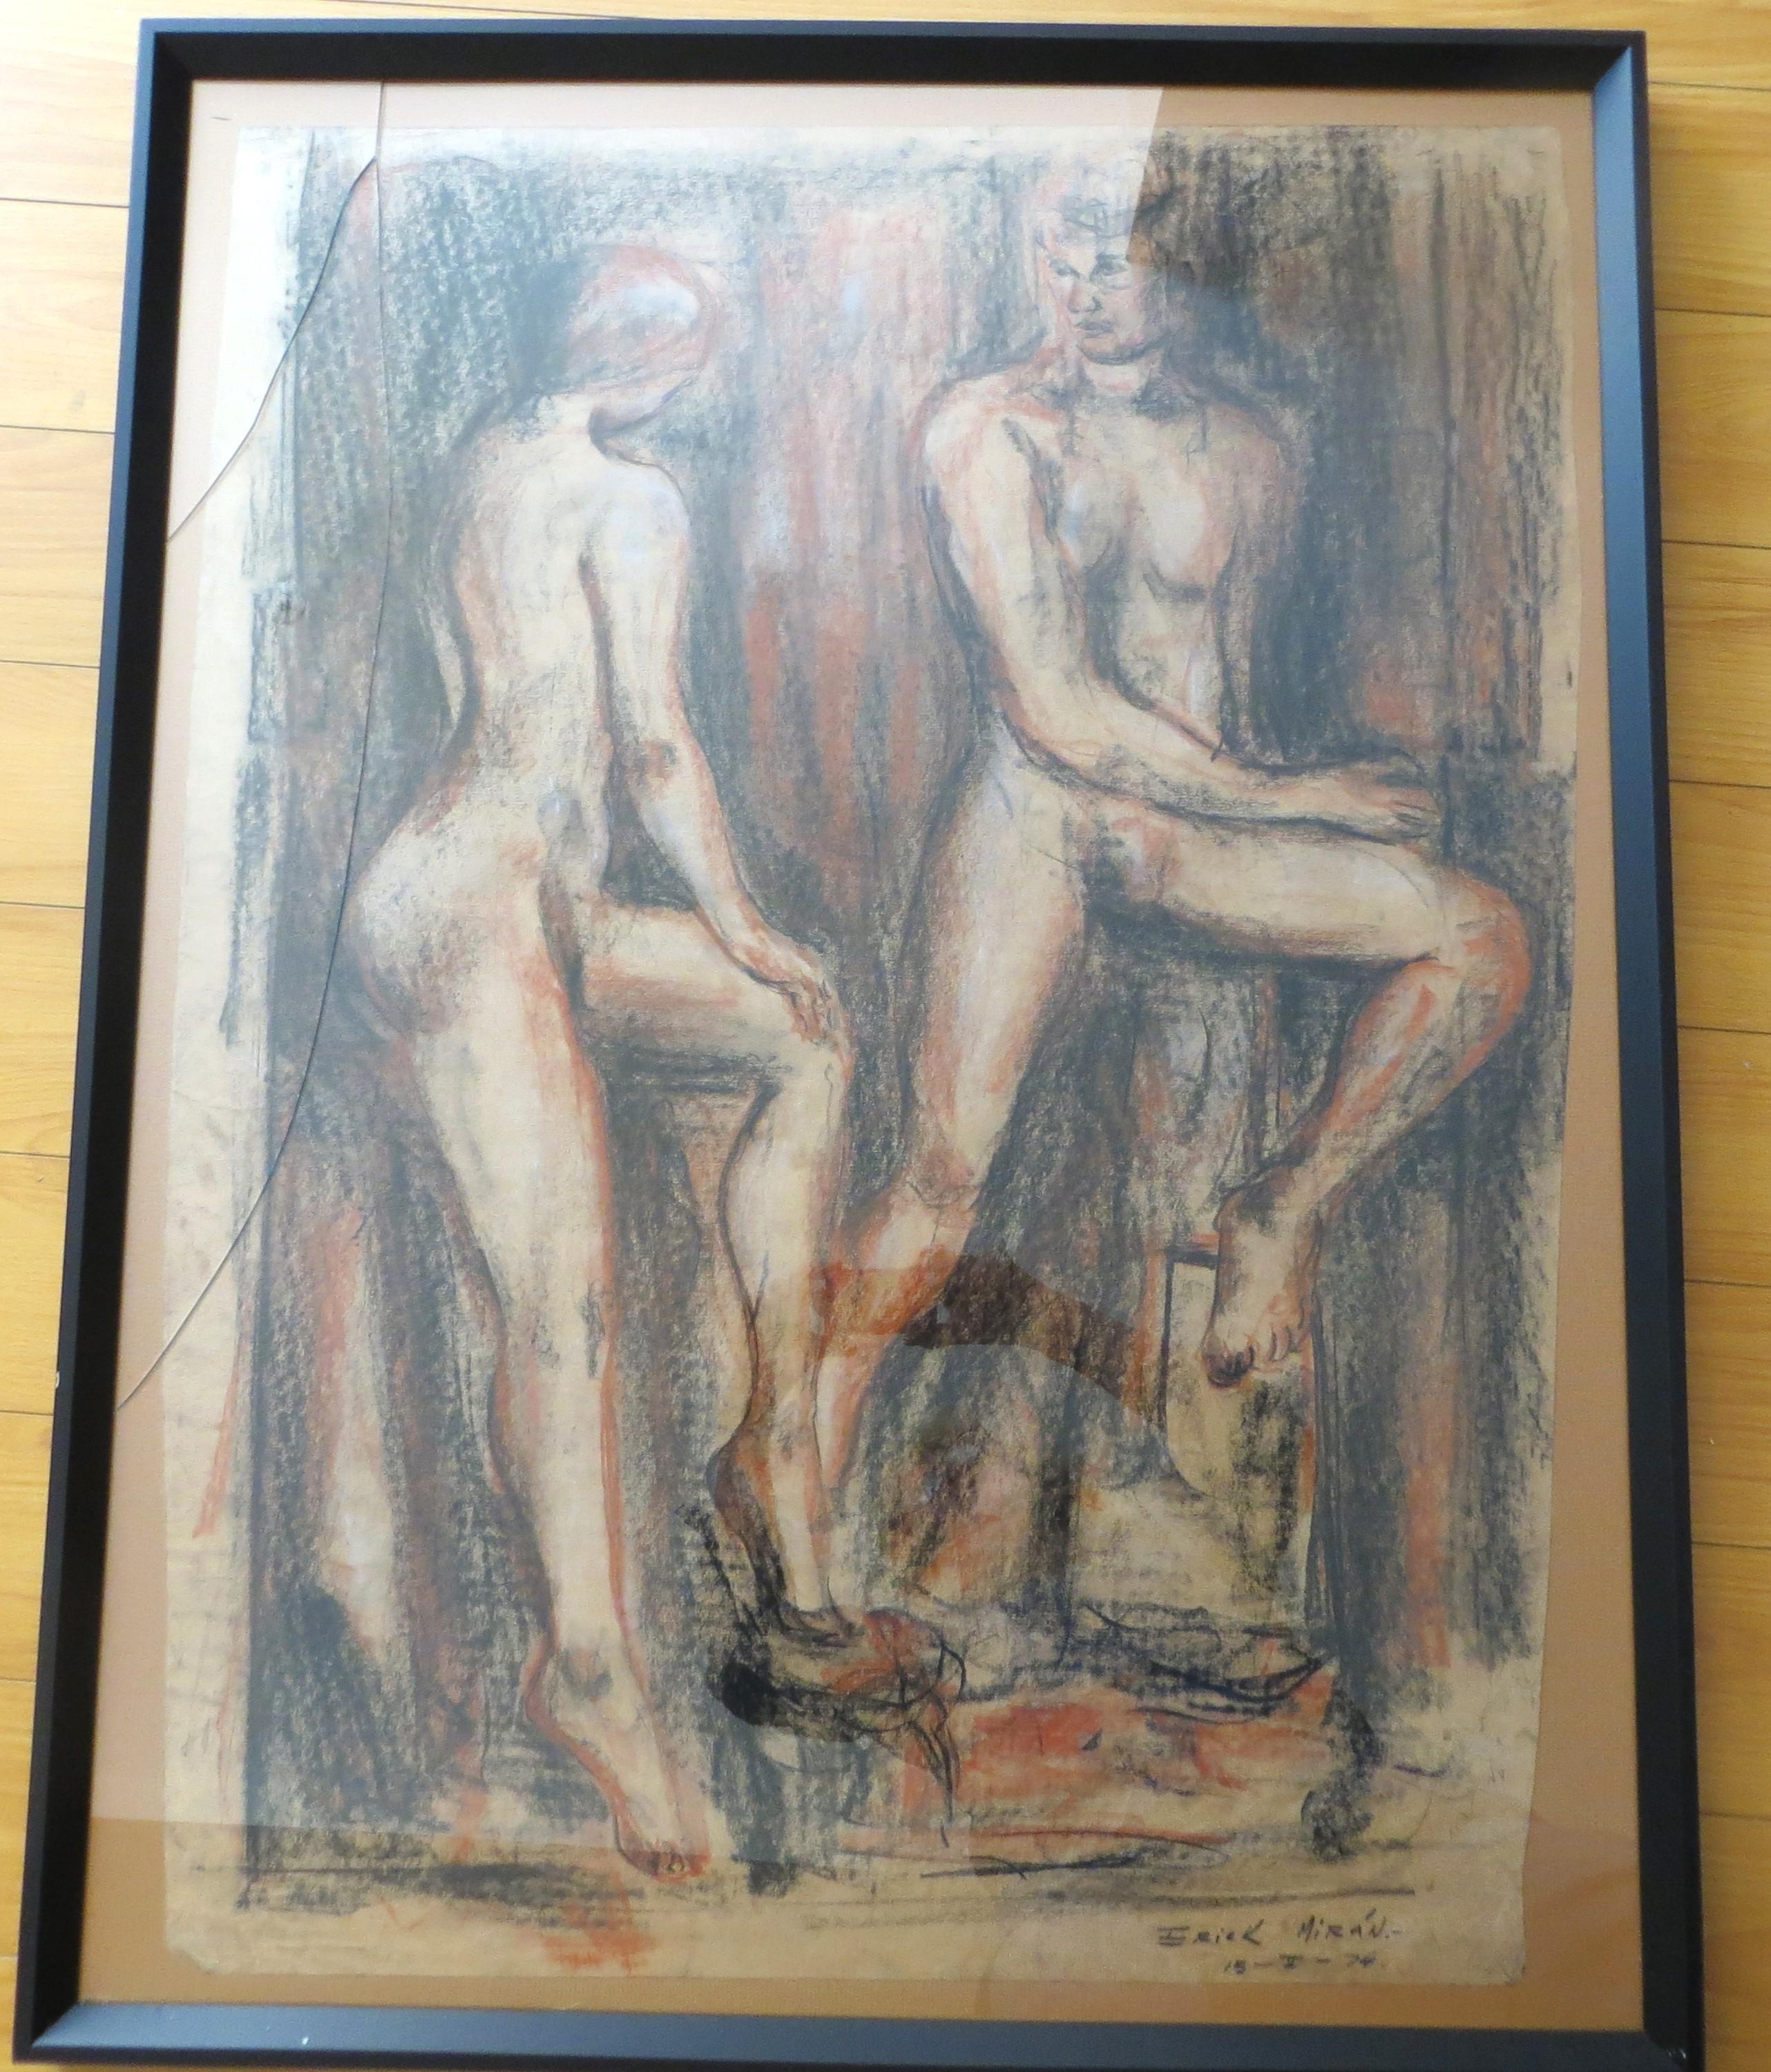 Nude Couple, Pastel Drawing Signed Erik Miran 1976 - Post-Modern Art by Unknown